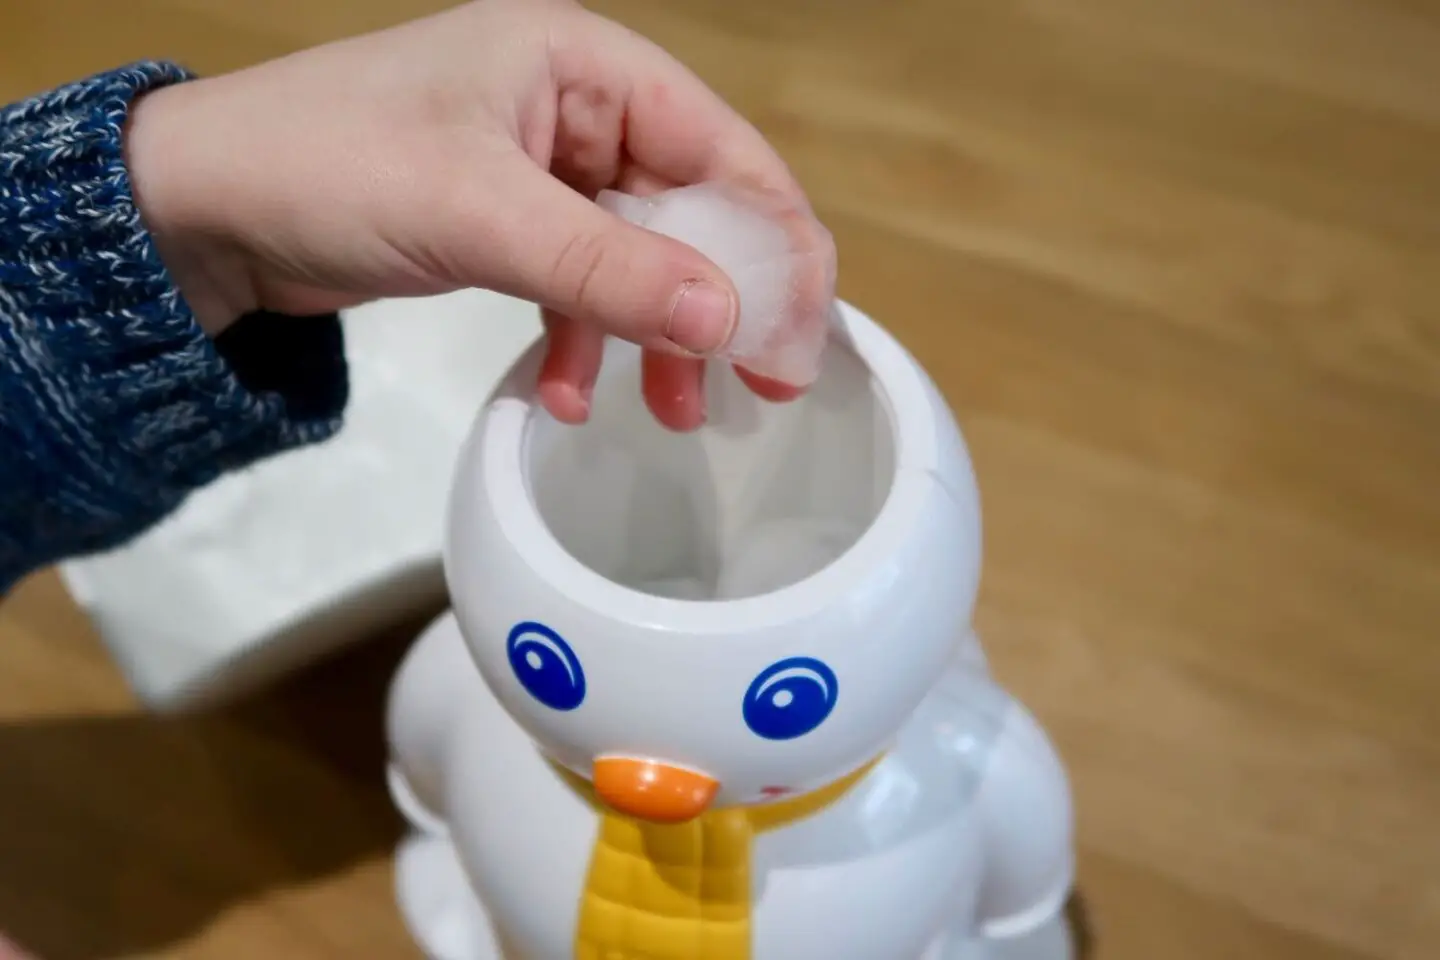 Spice up the ice with Mr. Frosty the Ice Crunchy Maker! - UK Mums TV